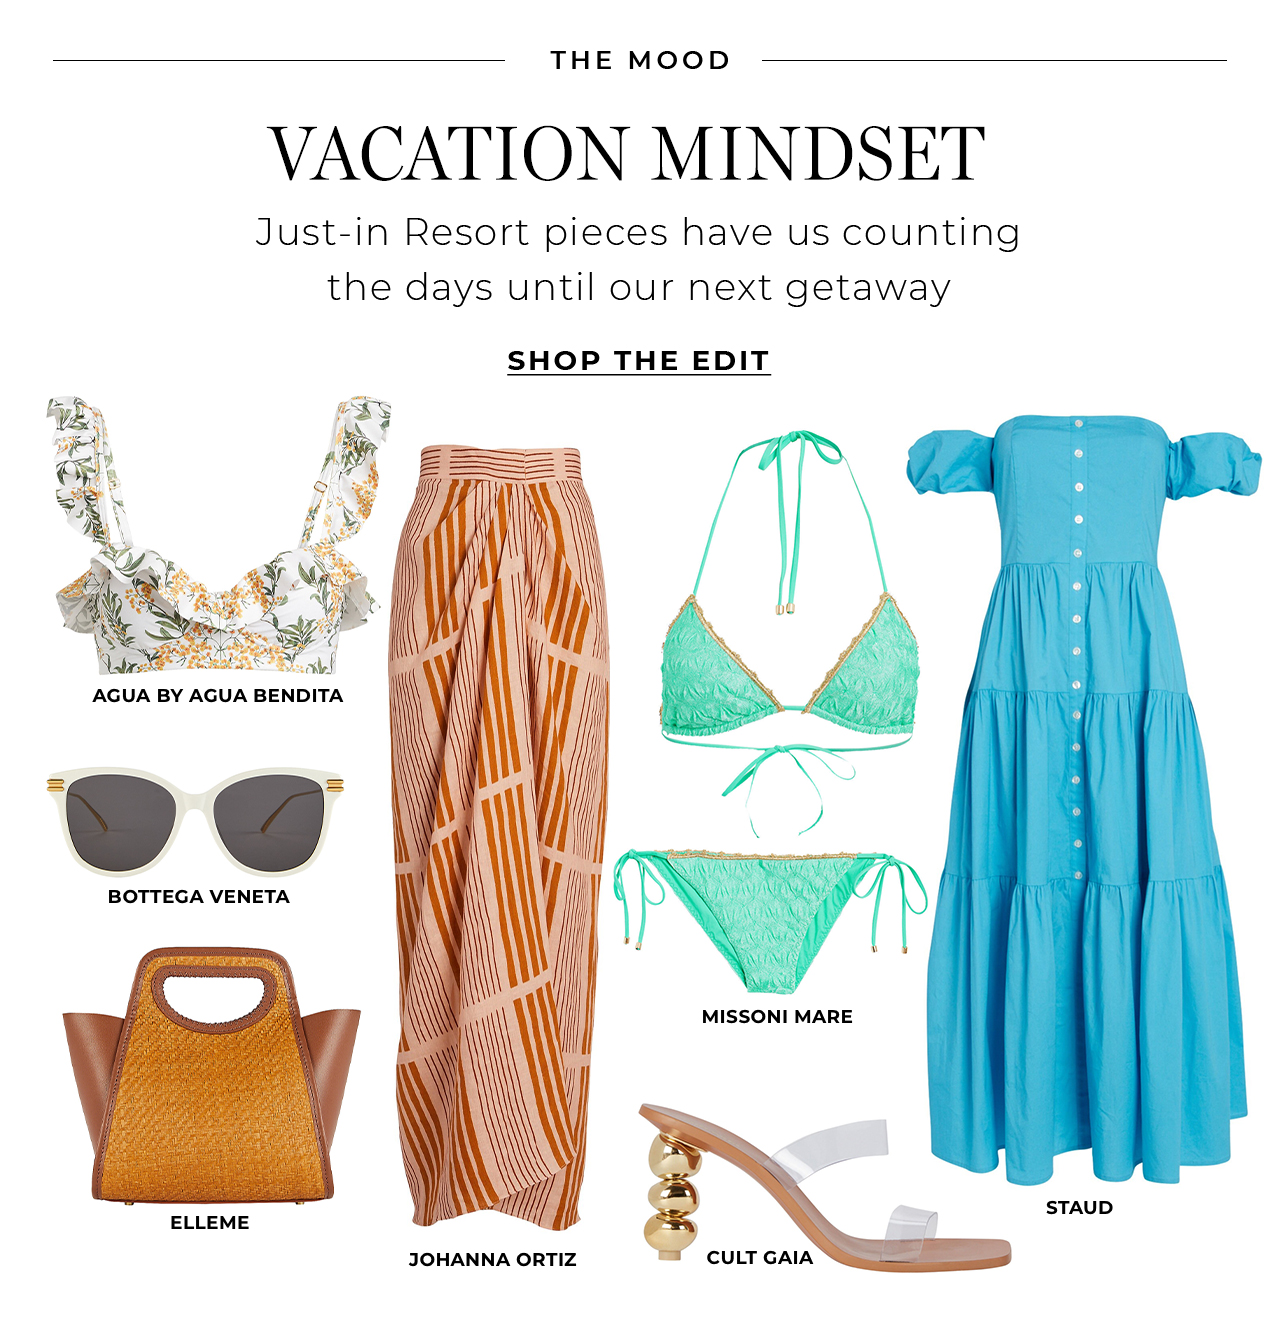 Just-in Resort pieces have us counting the days until our next getaway